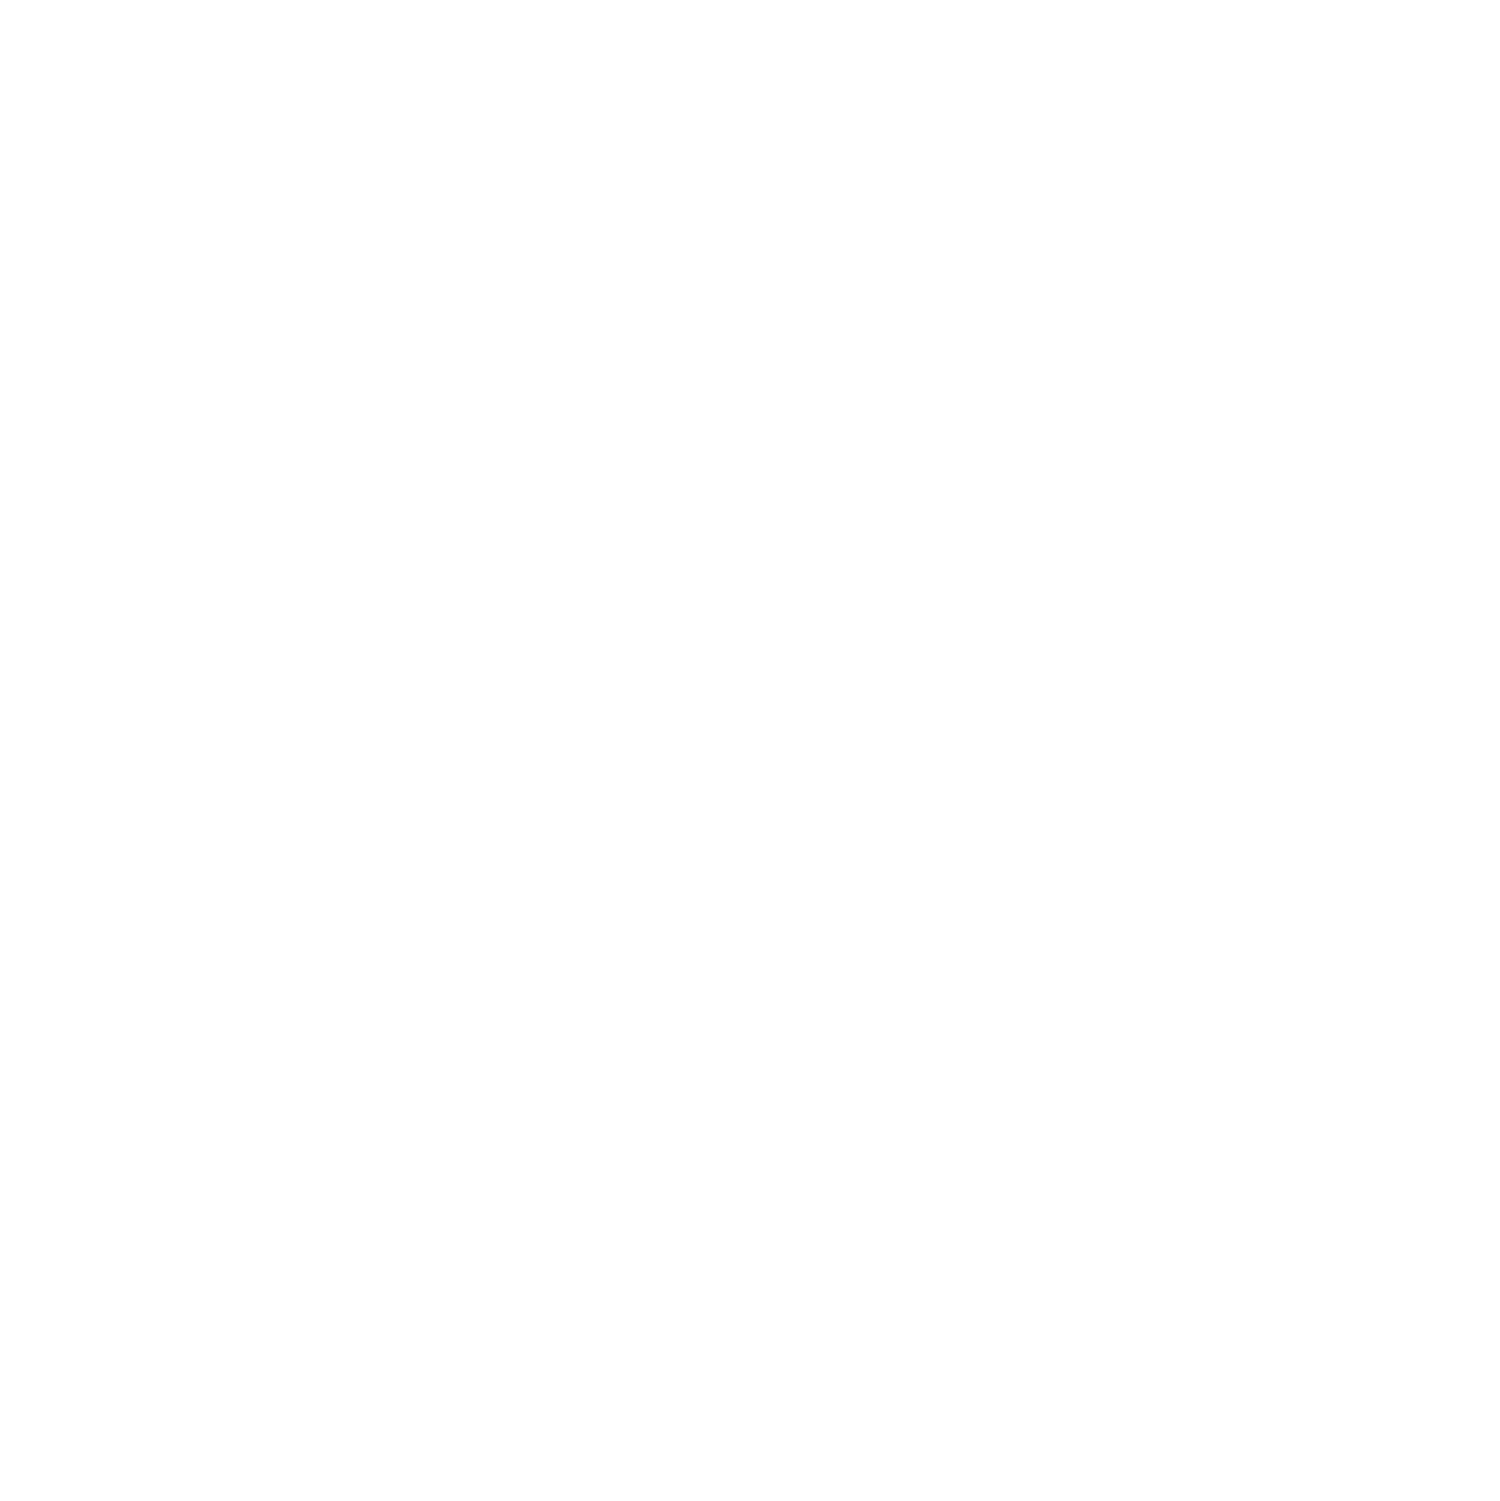 Collectorbags